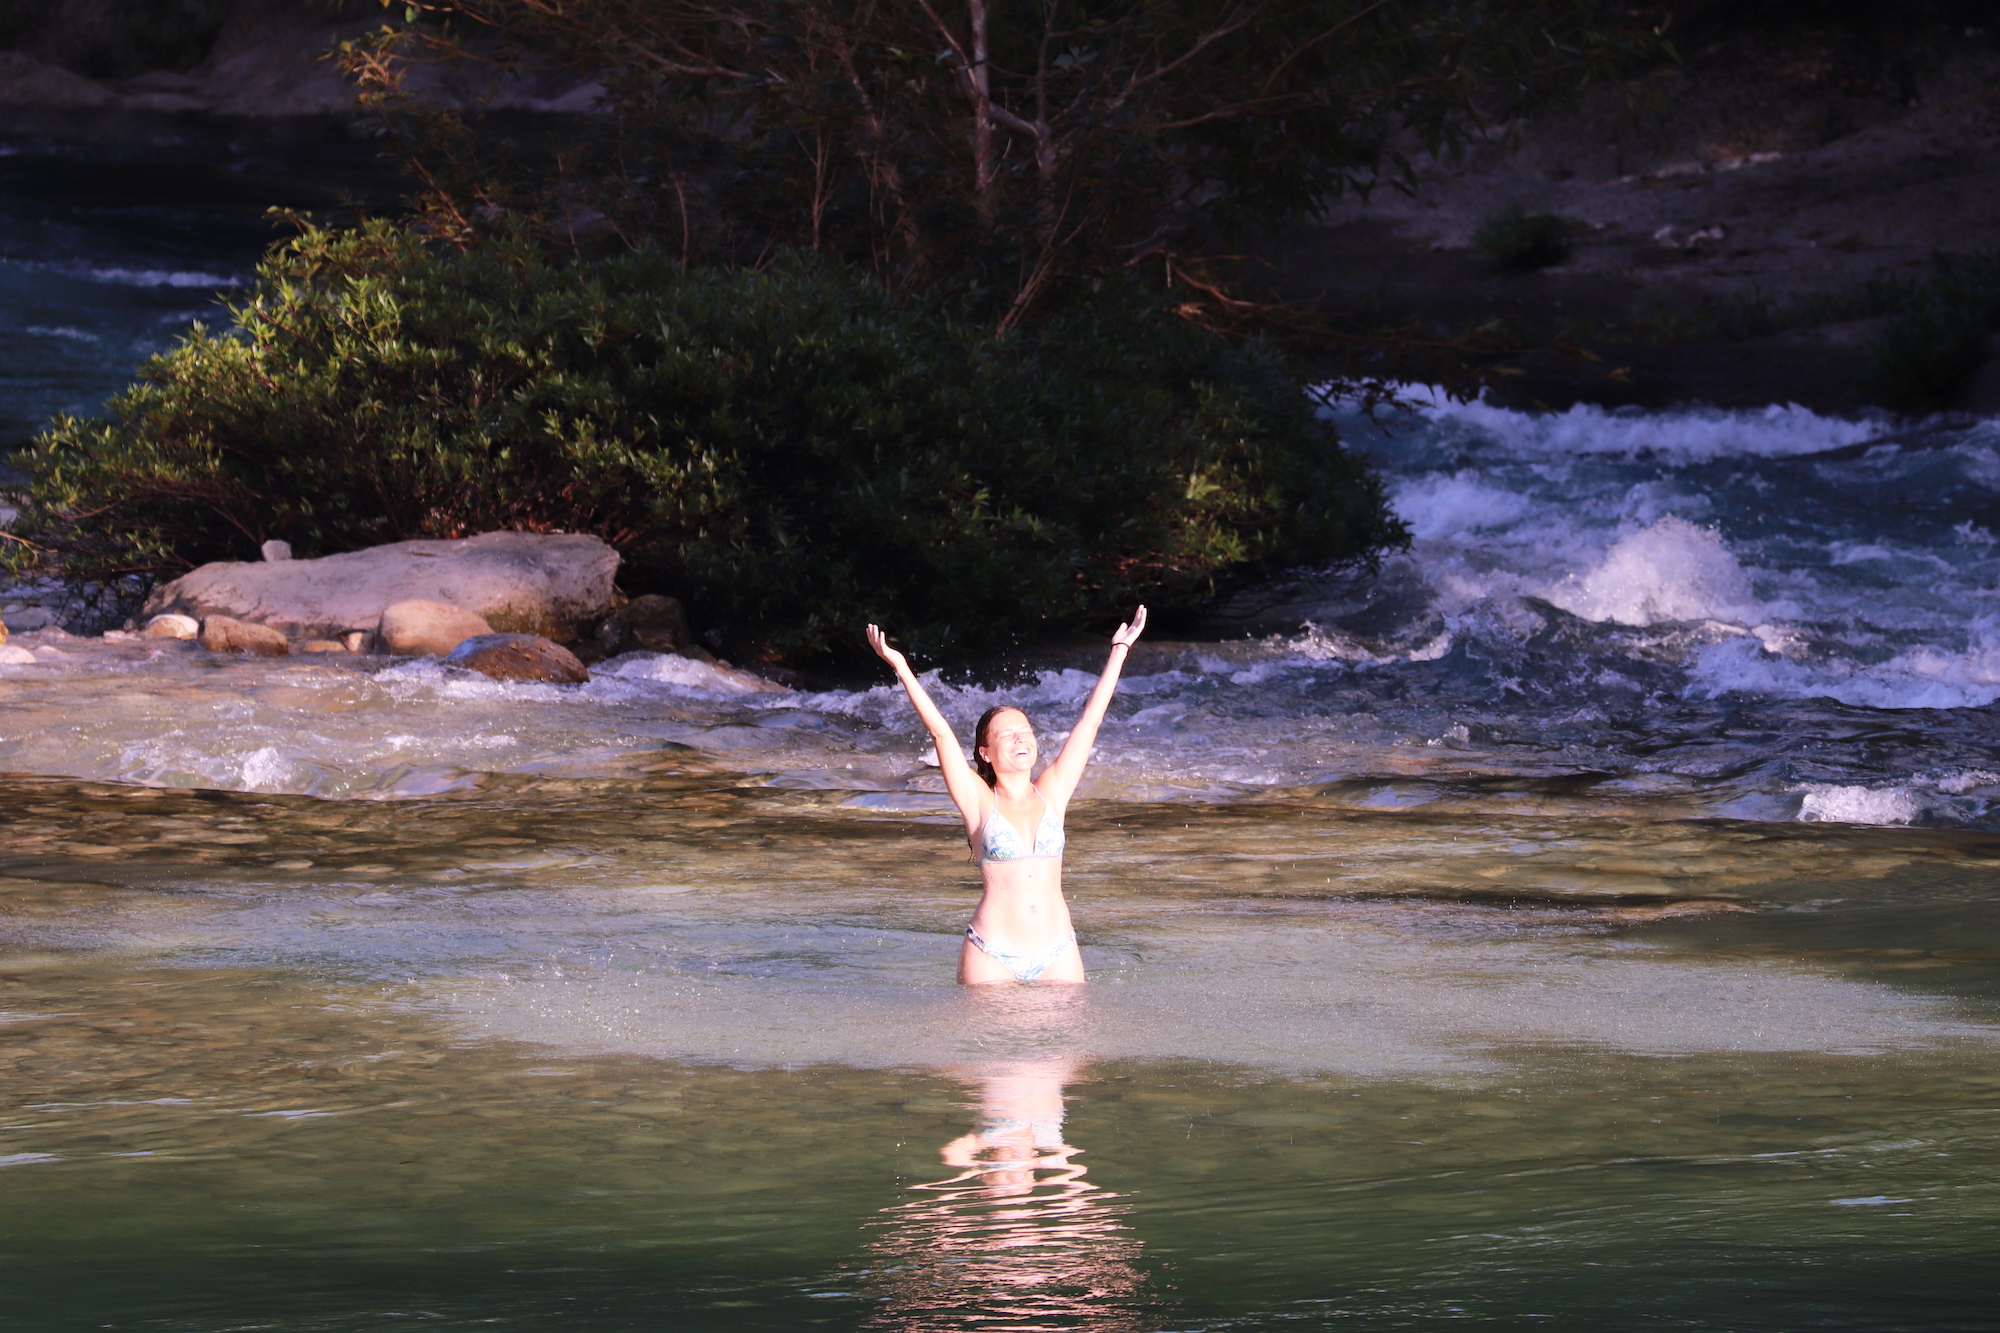 Amazing experience in the rivers of Chiapas' jungle